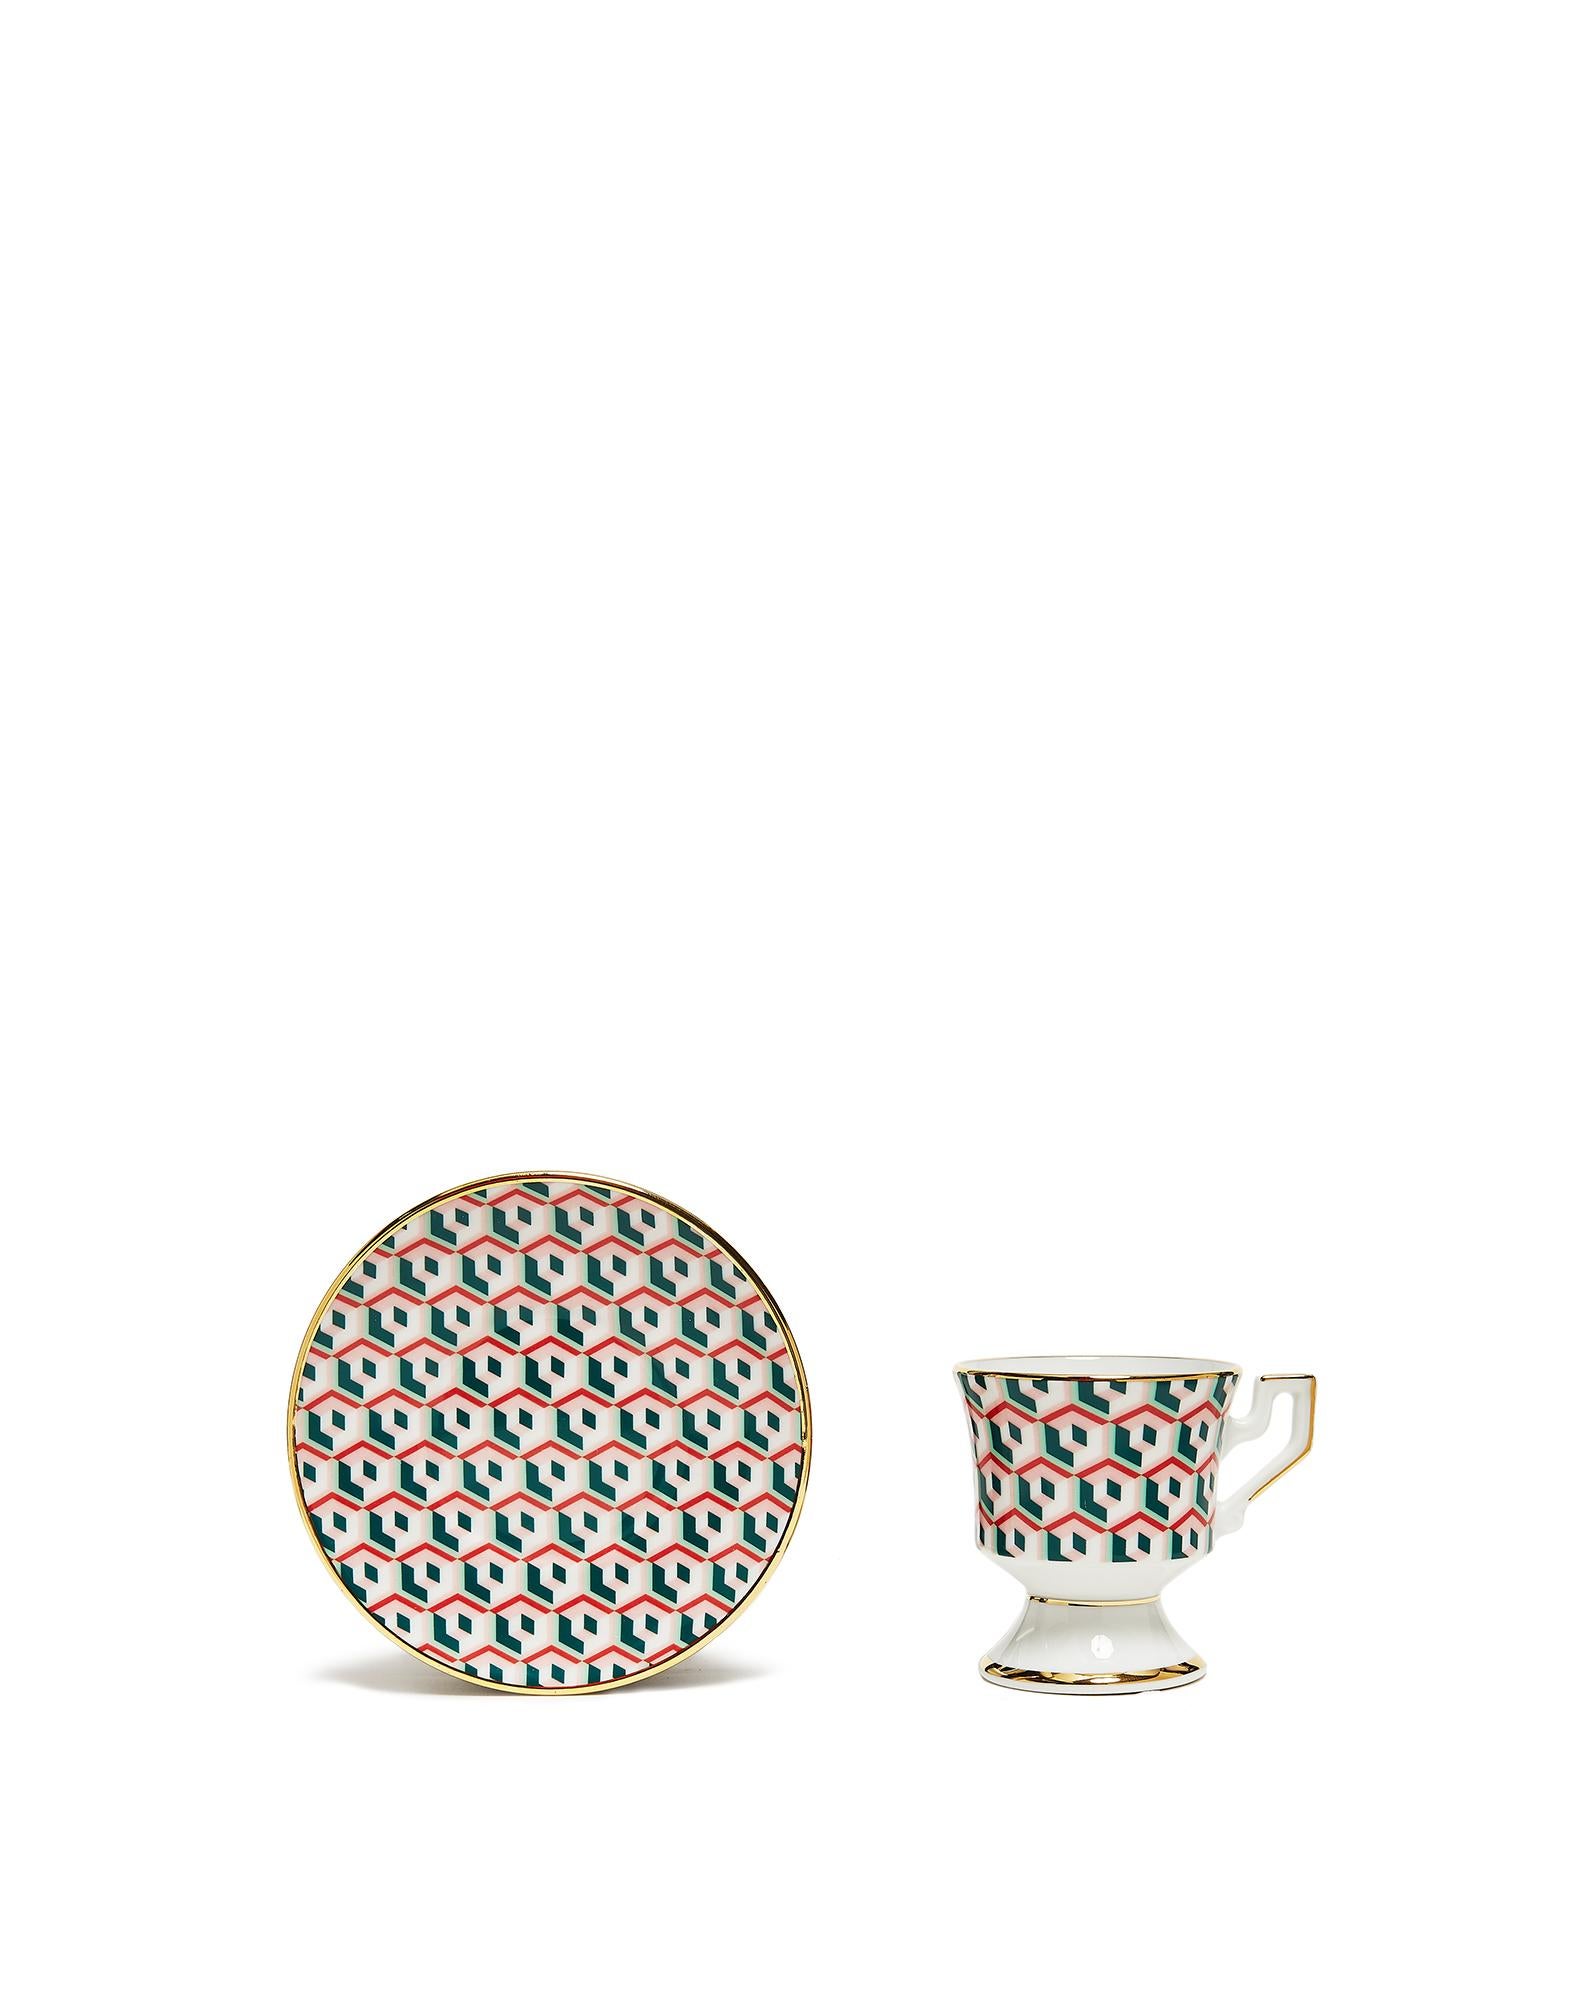 Part of our haute home collaboration with 1stDibs, this set of espresso cups and saucers is hopping and bopping in six different shades of a 1960s geometric print that you vintage babes will adore. Arriving with delicate saucers to match, each is